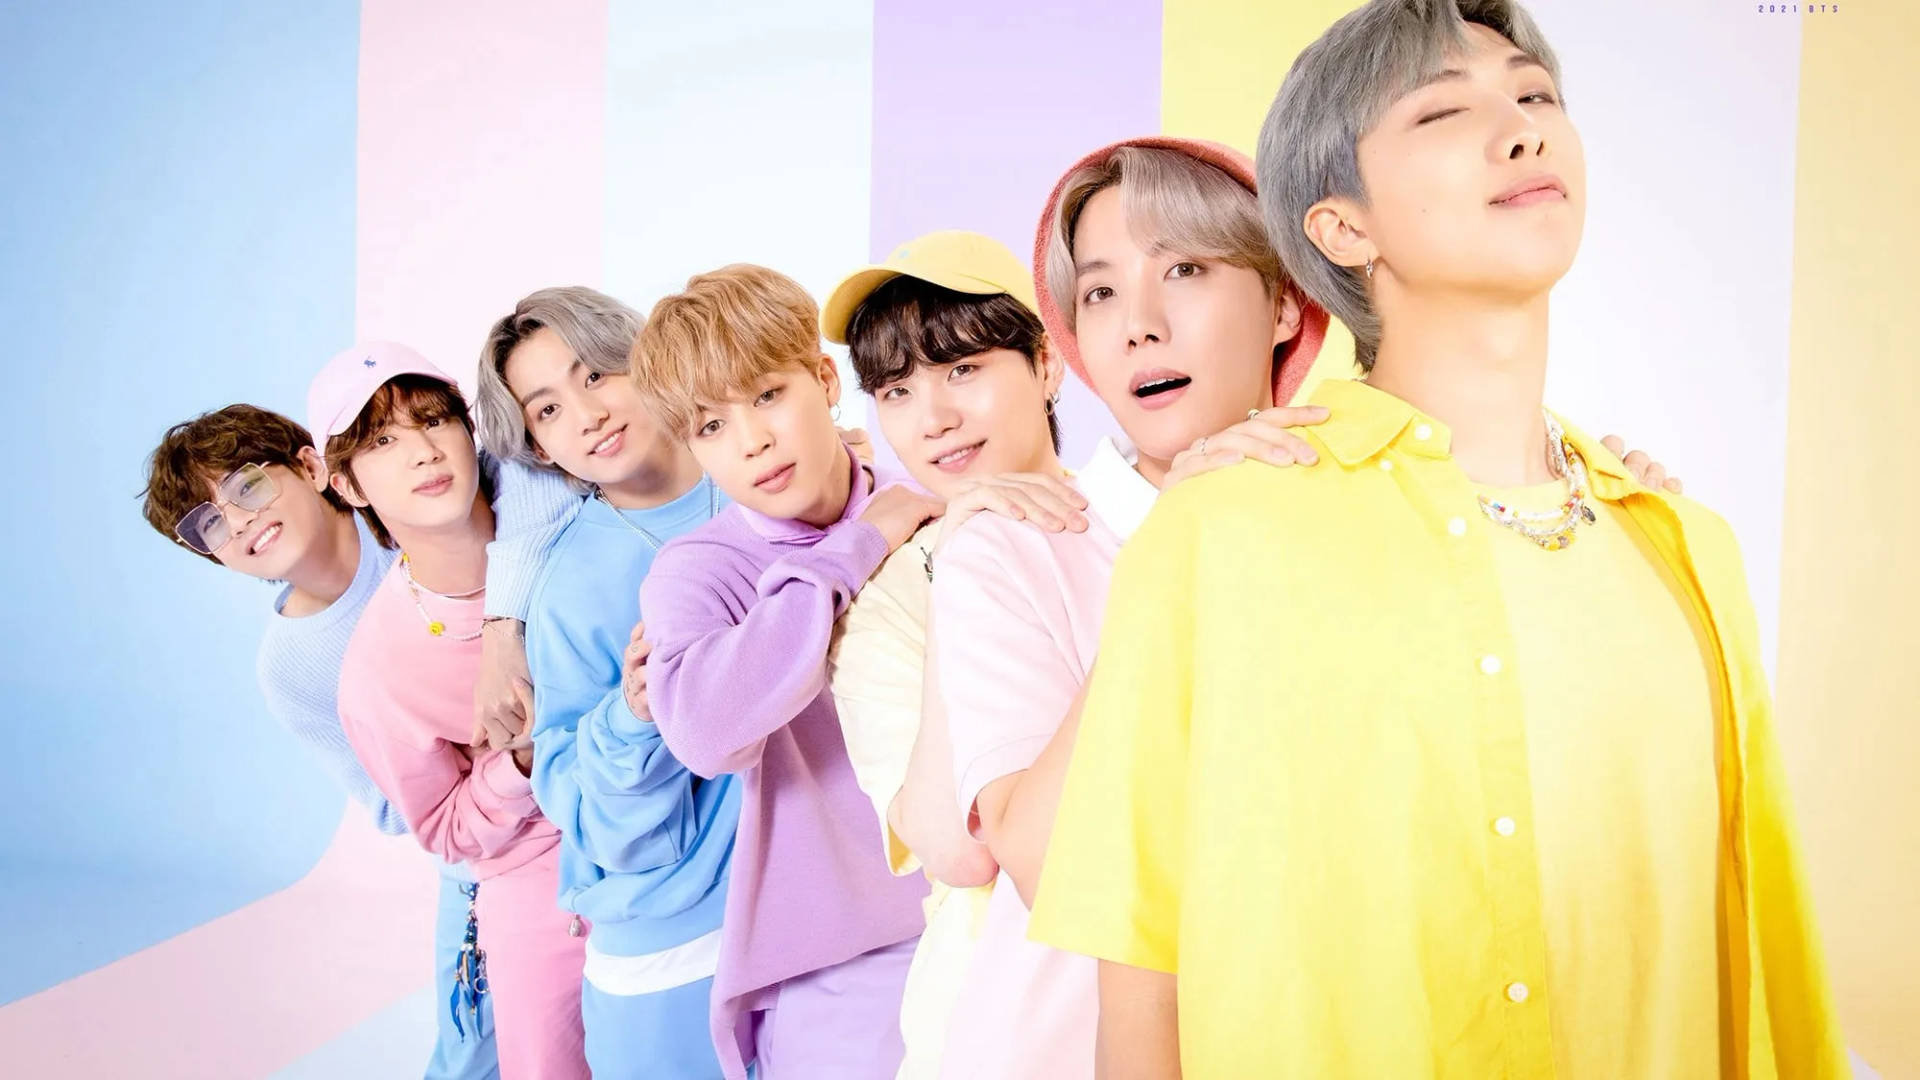 Cute Bts Group Lined Up In Pastel Colors Background